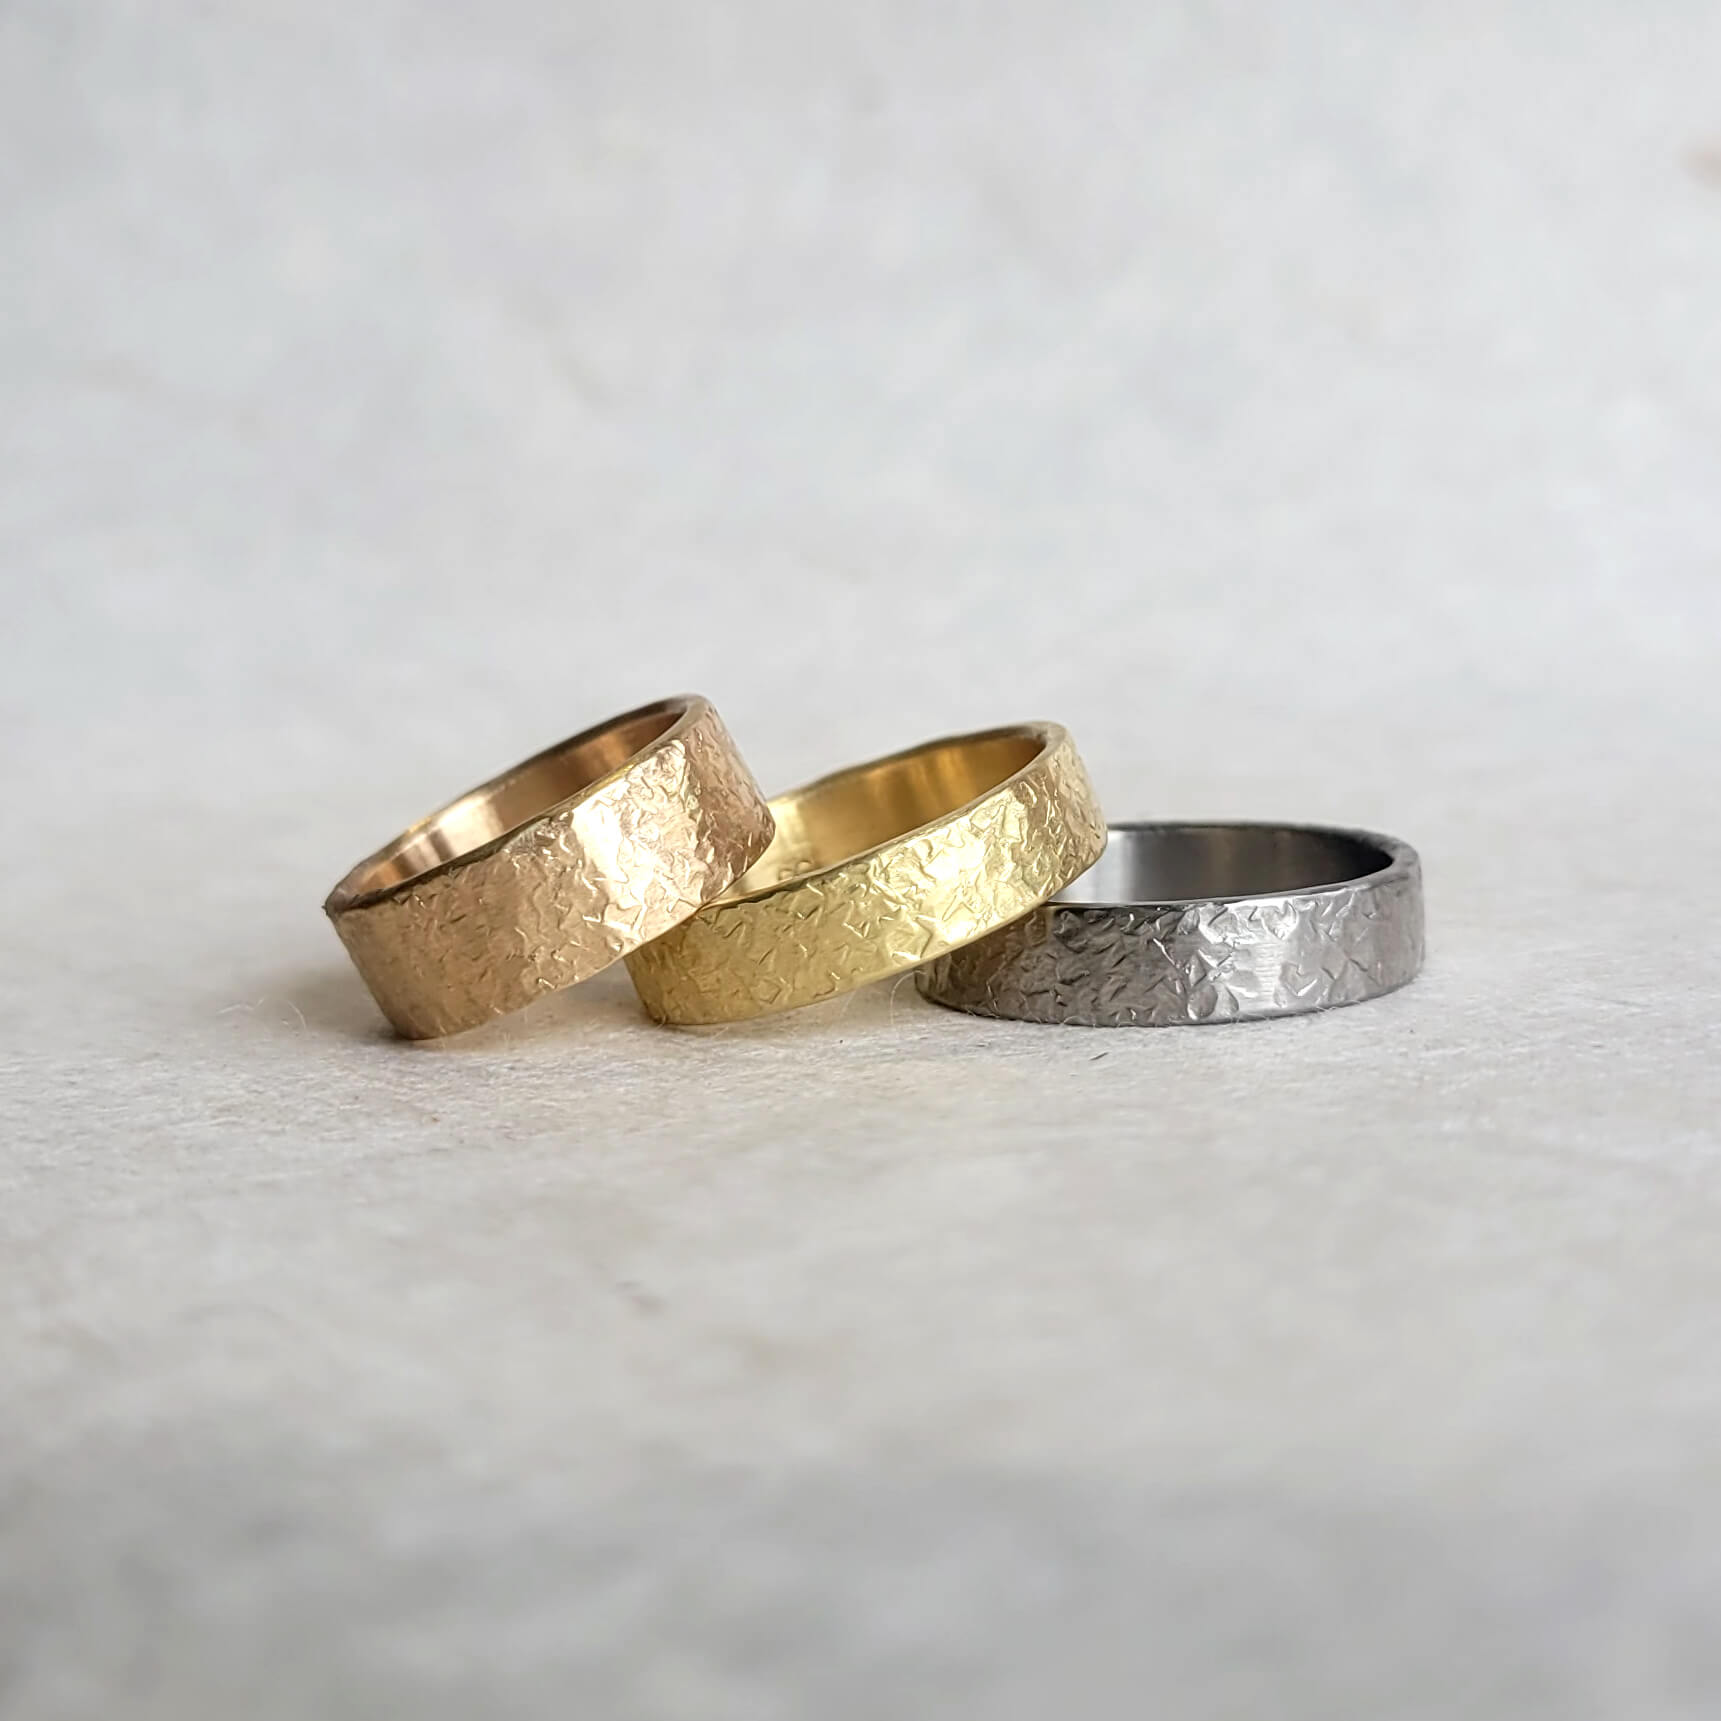 Silk hammered palladium wedding band made with recycled metal. EC Design Jewelry in Minneapolis, MN.